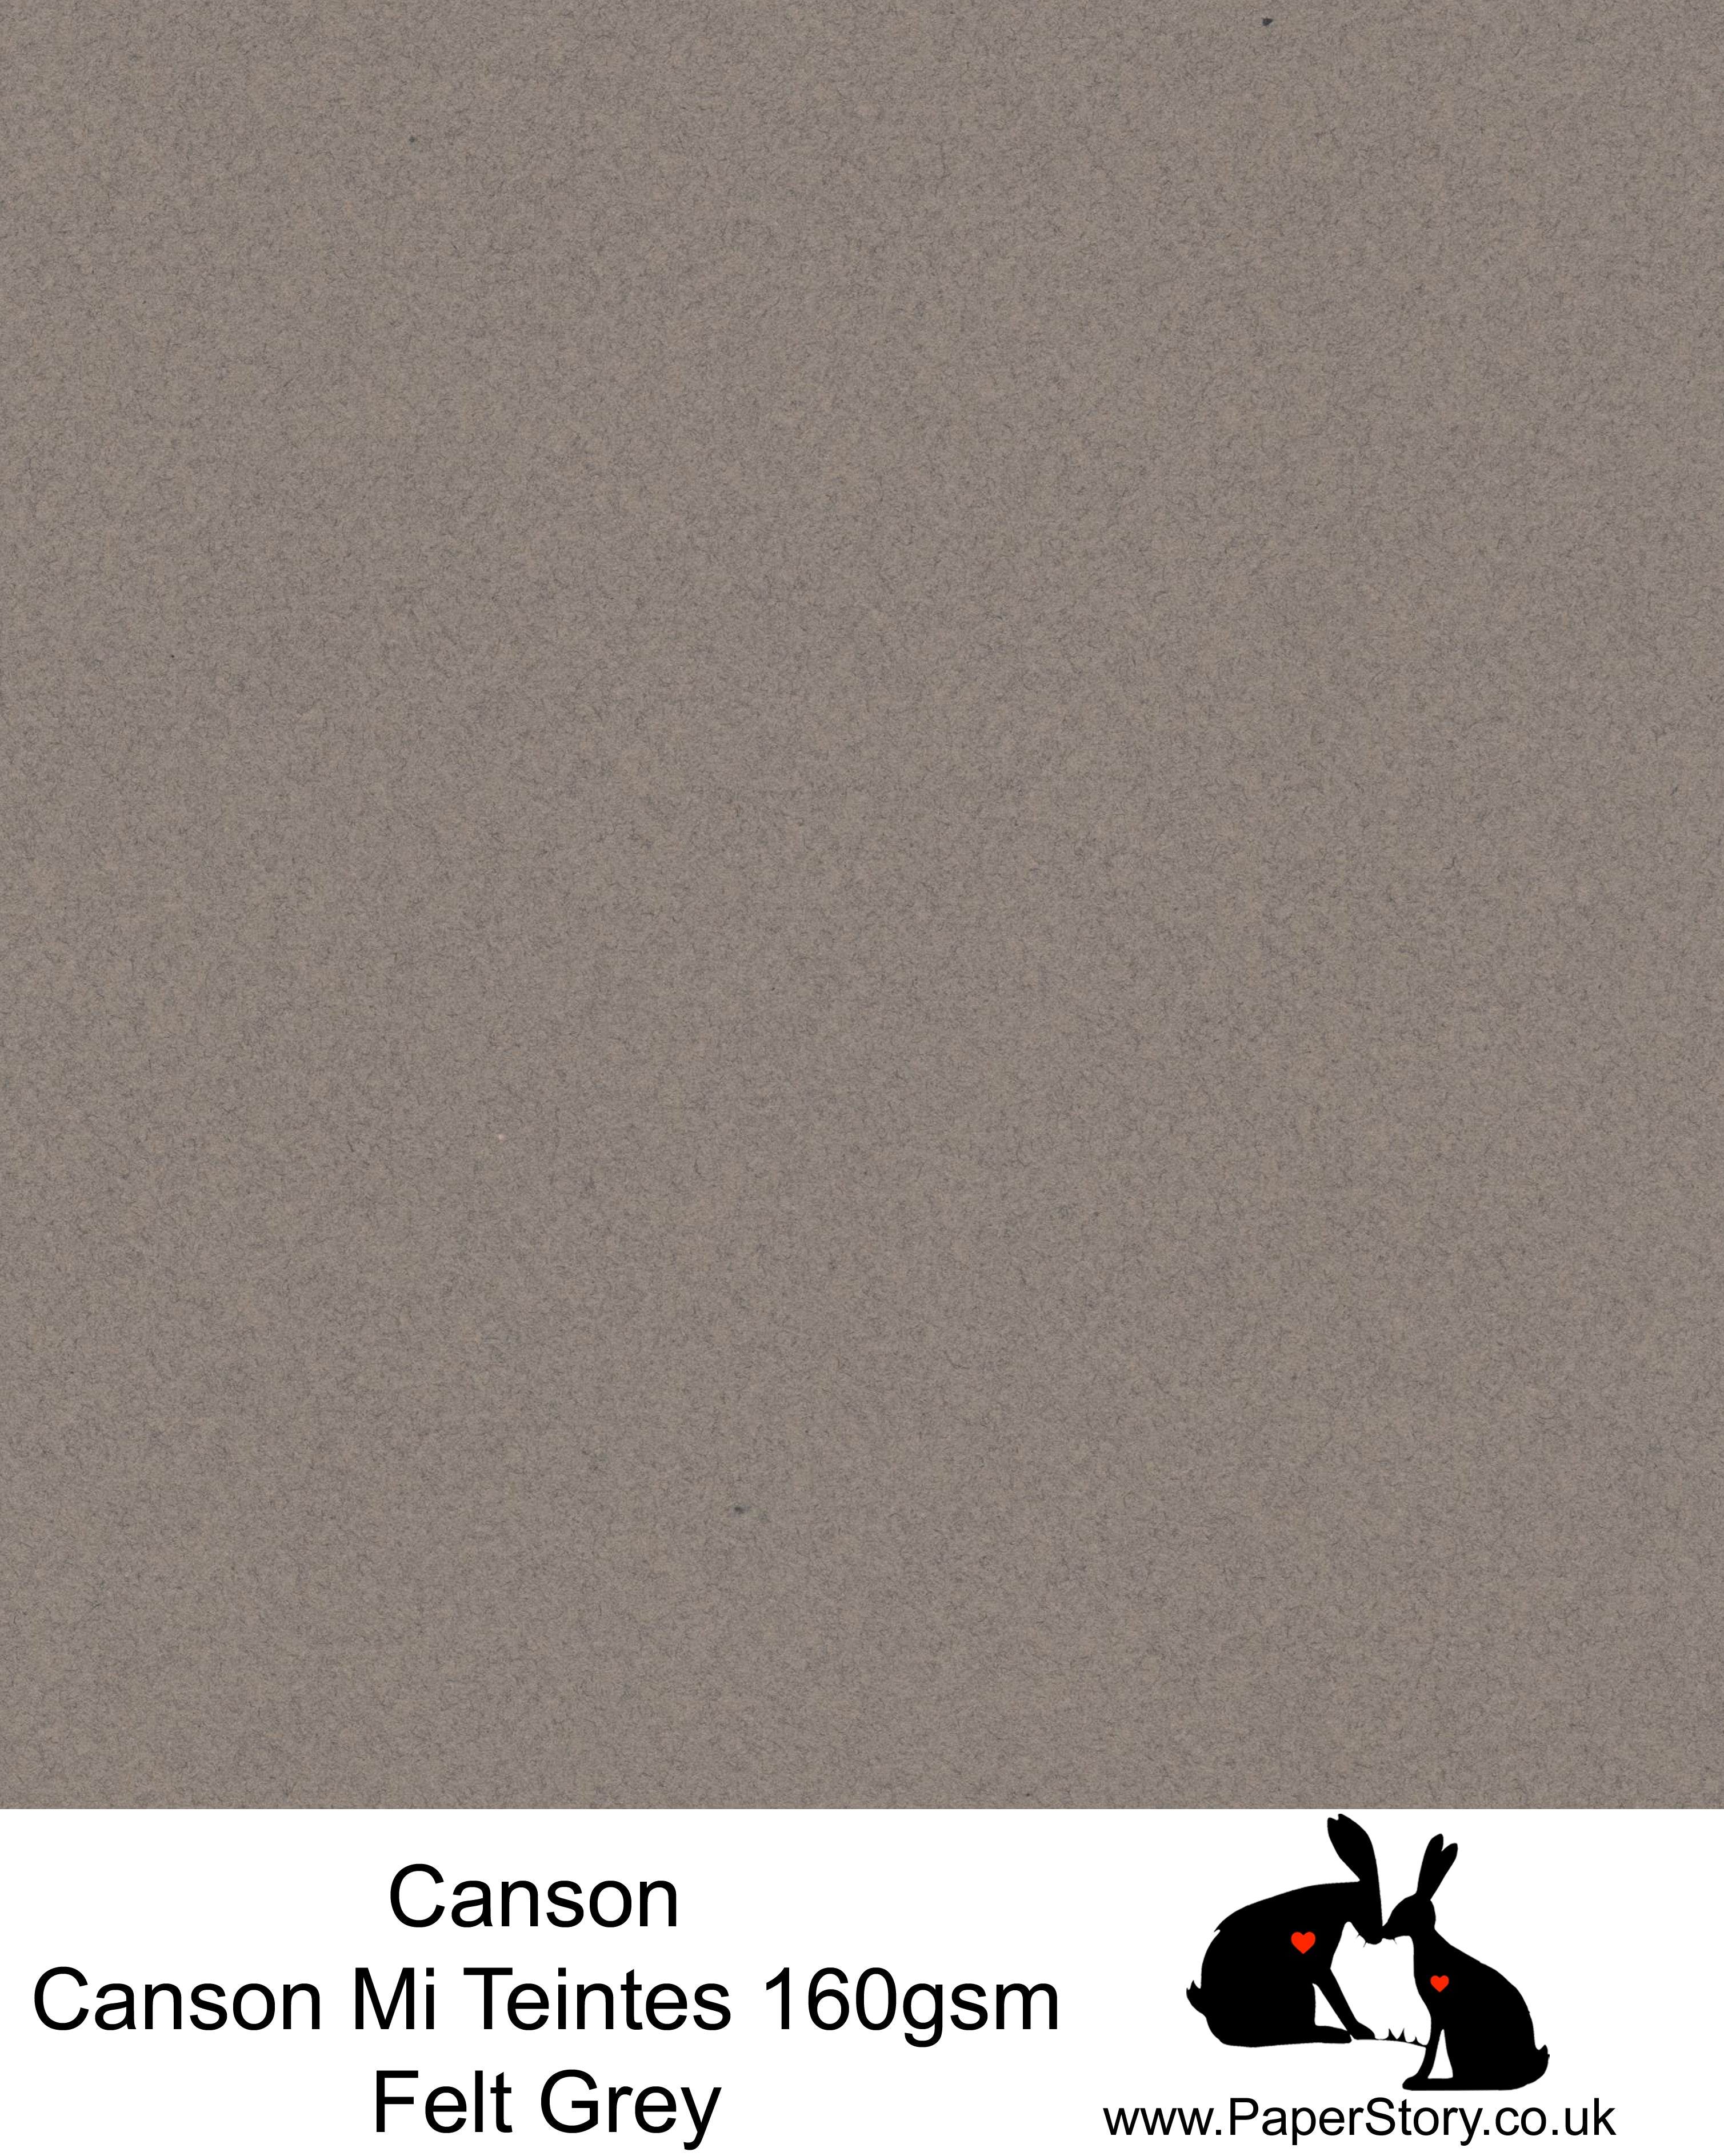 Canson Mi Teintes acid free, Felt Grey, warm grey brown, hammered texture honeycomb surface paper 160 gsm. This is a popular and classic paper for all artists especially well respected for Pastel  and Papercutting made famous by Paper Panda. This paper has a honeycombed finish one side and fine grain the other. An authentic art paper, acid free with a  very high 50% cotton content. Canson Mi-Teintes complies with the ISO 9706 standard on permanence, a guarantee of excellent conservation  